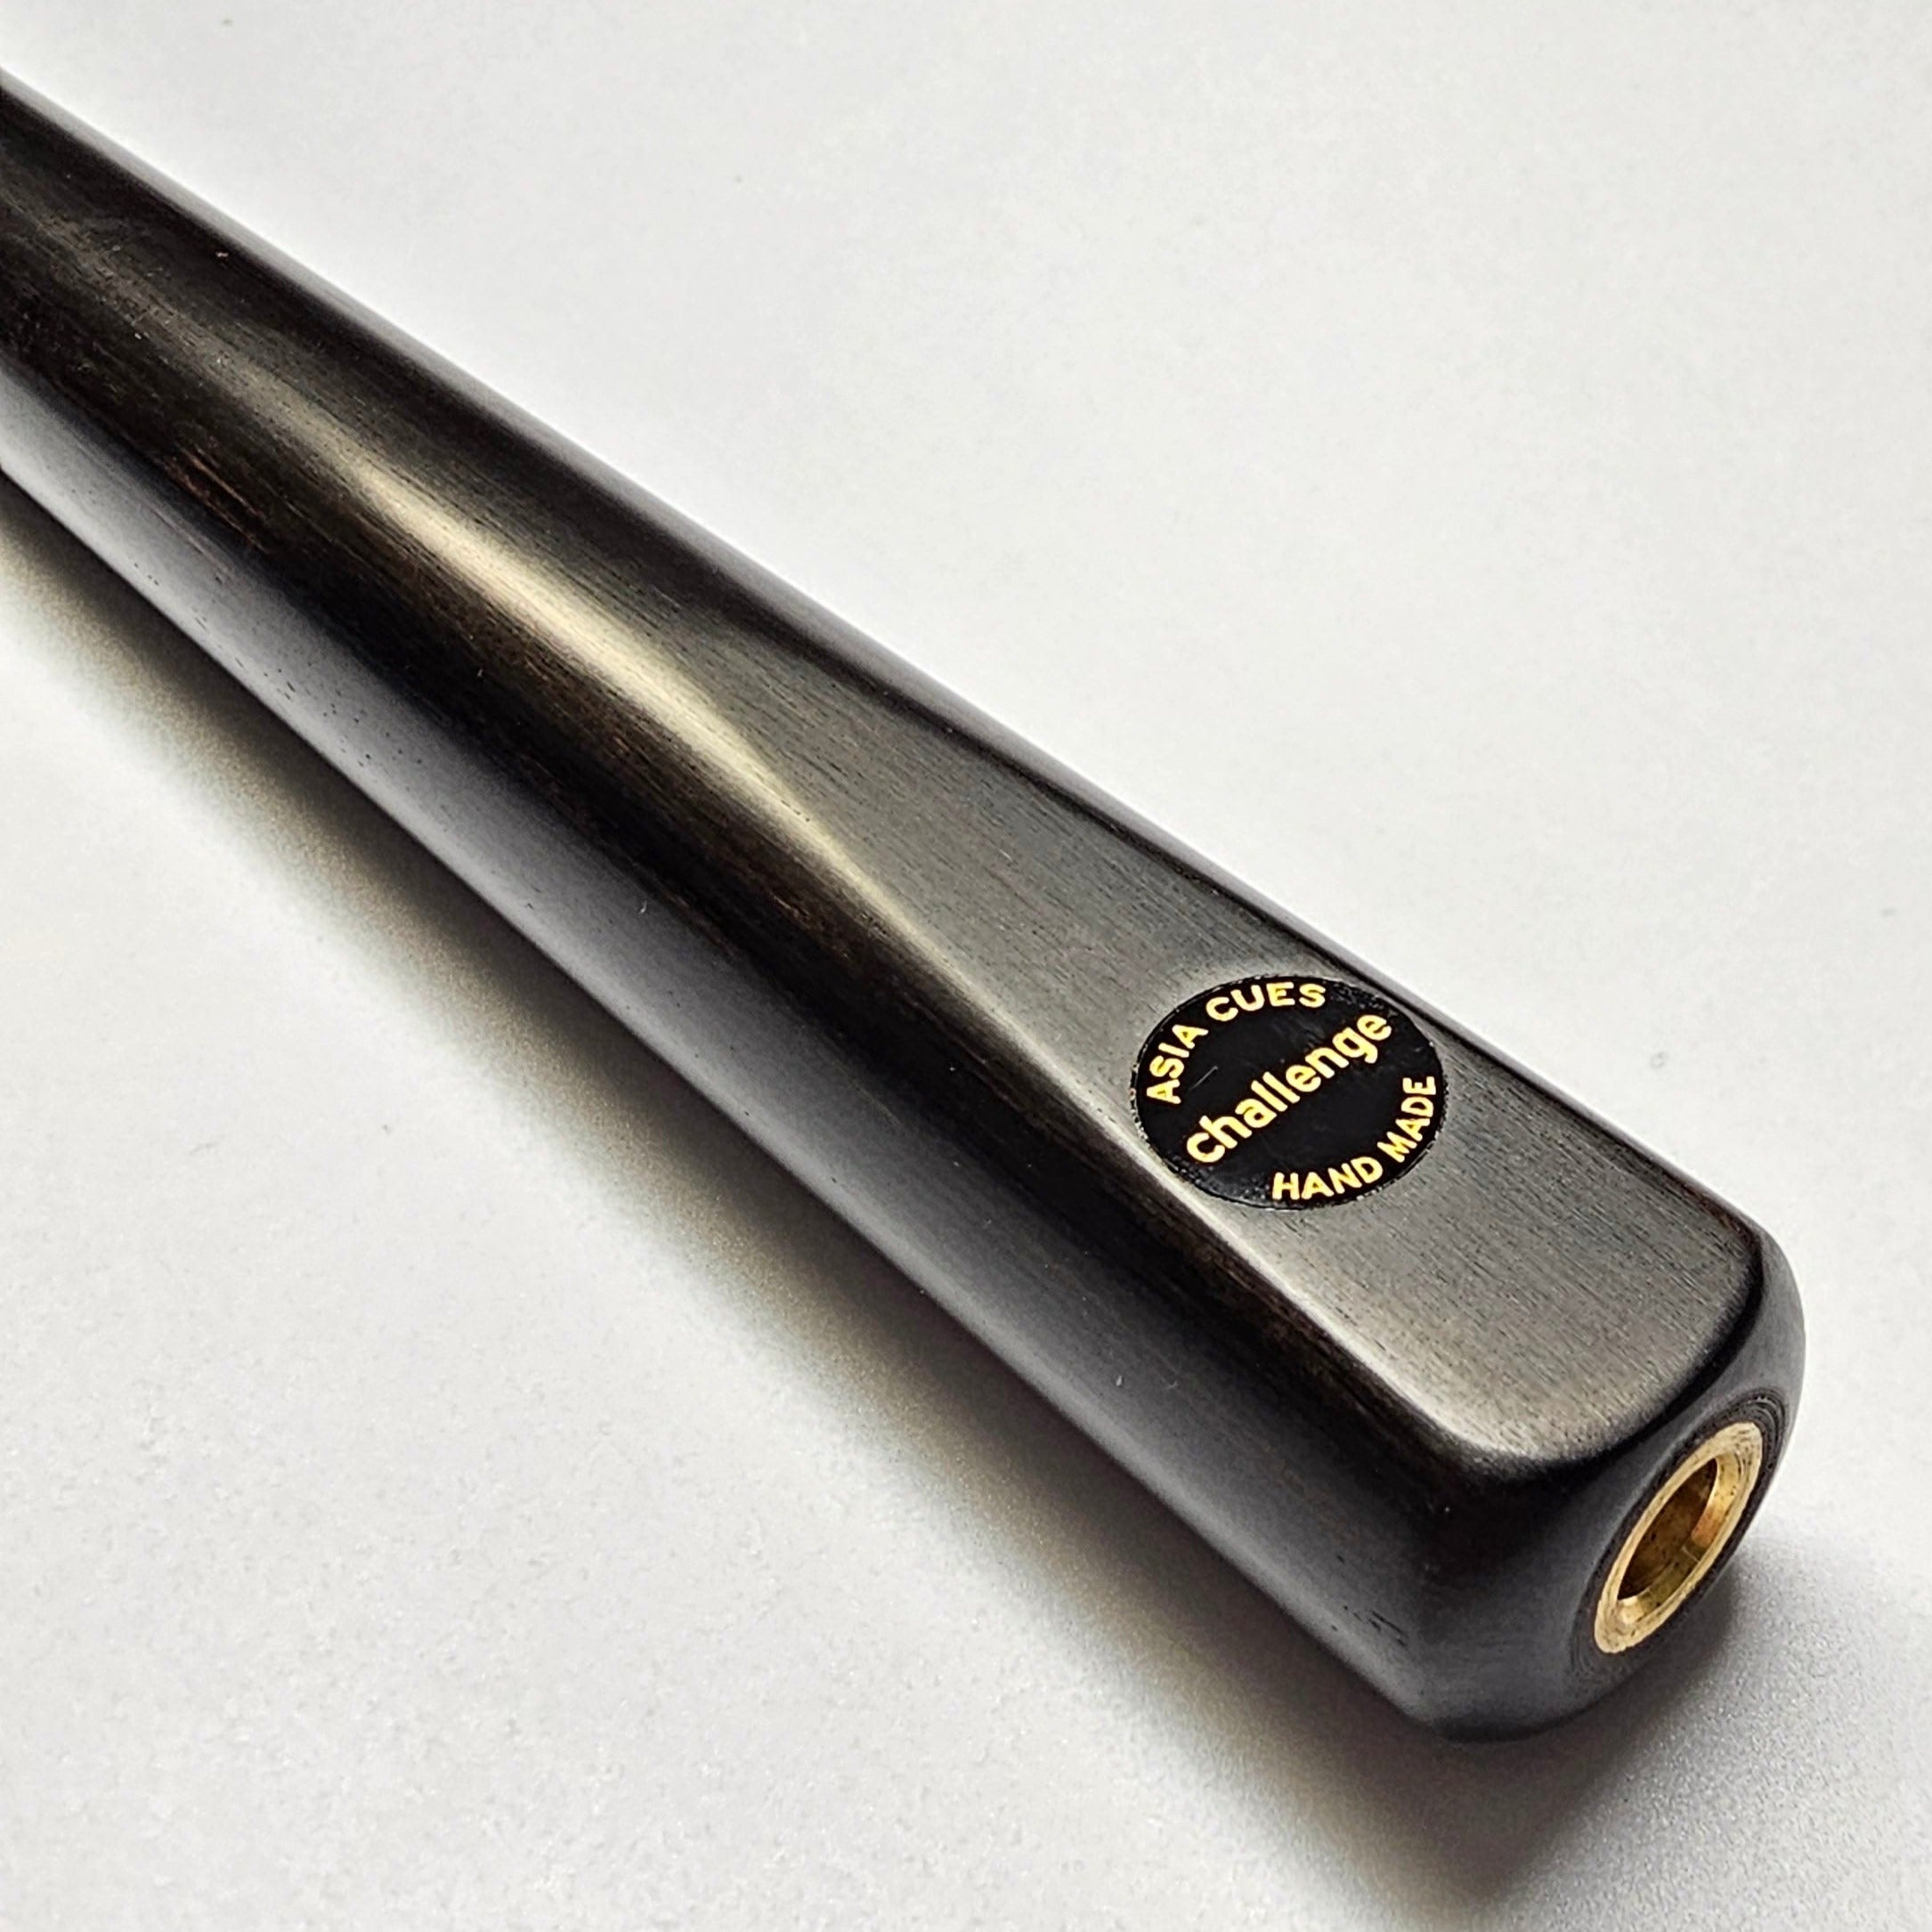 Asia Cues Challenge Range One Piece Cue Ash Shaft Ebony Butt. Badge View